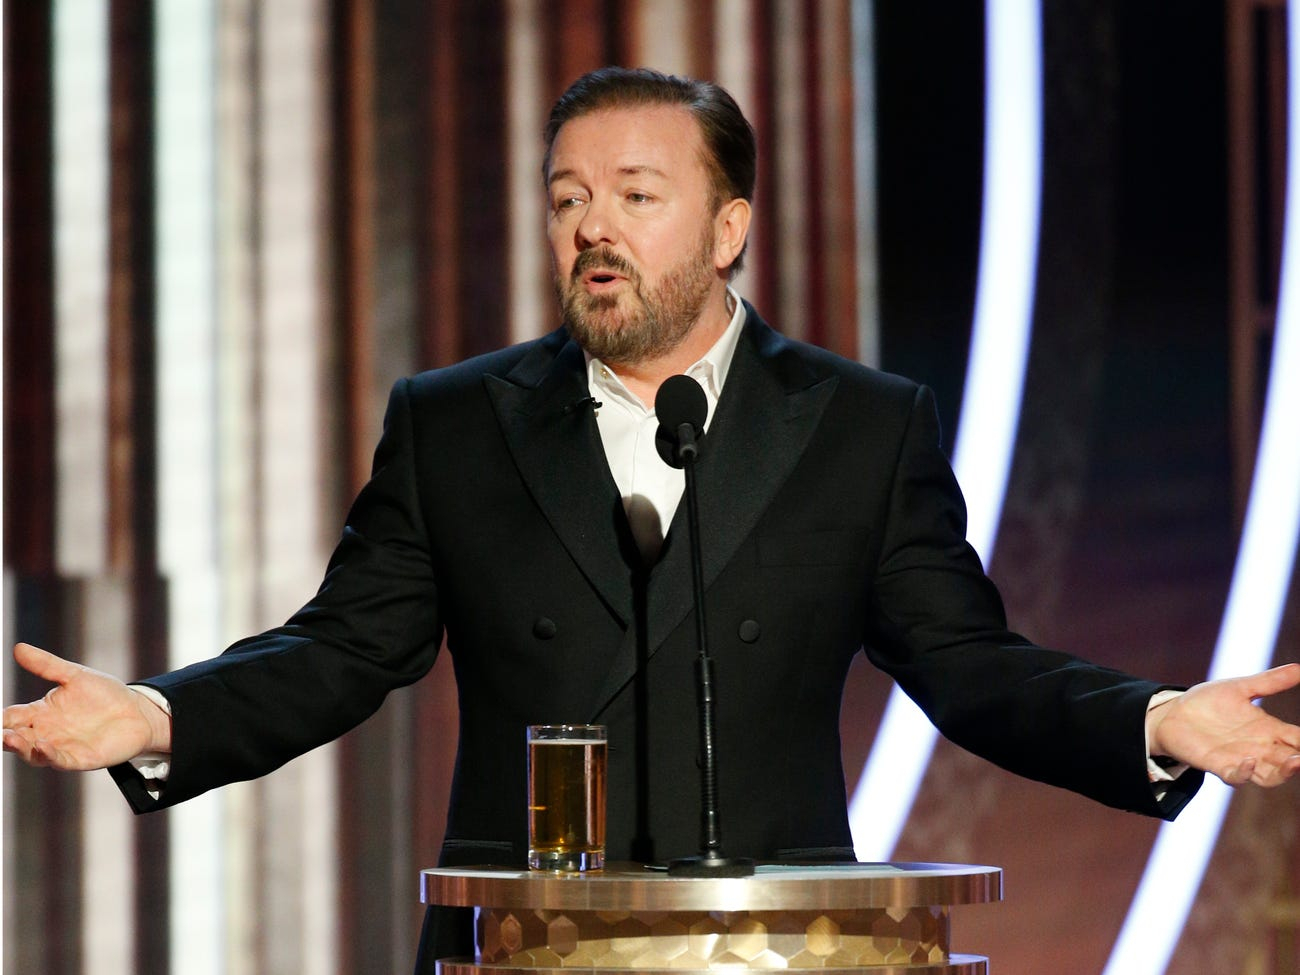 Ripped junkies who know nothing about real world Ricky Gervais roasts